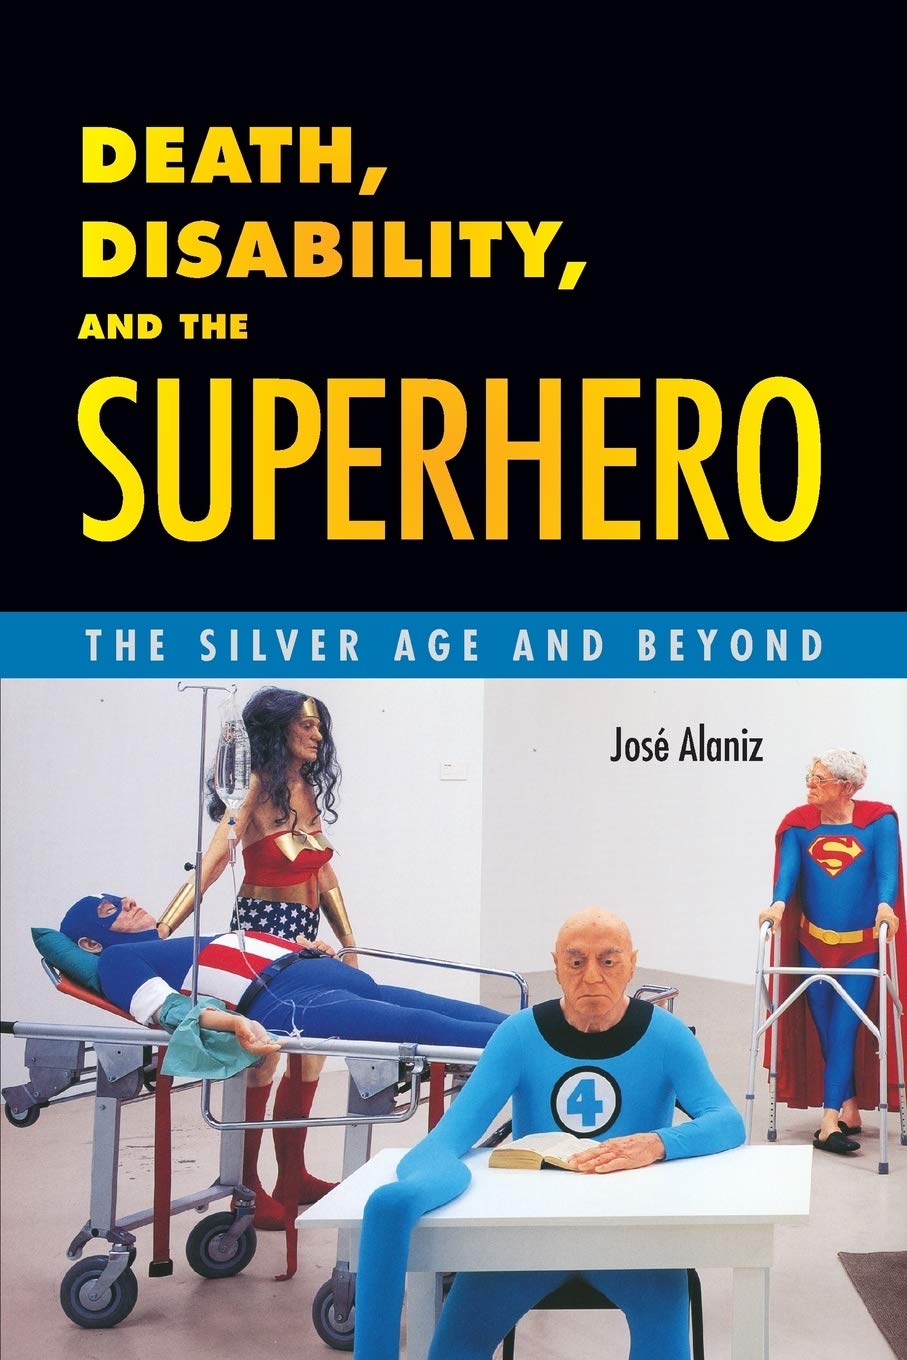 Cover to José Alaniz's 2014 book "Death, Disability and the Superhero: The Silver Age and Beyond," a detail from Gilles Barbier’s installation "Nursing Home" (L’hospice, 2002) which shows aged superheroes including Mr. Fantastic, Wonder Woman and Captain America in a nursing home. 